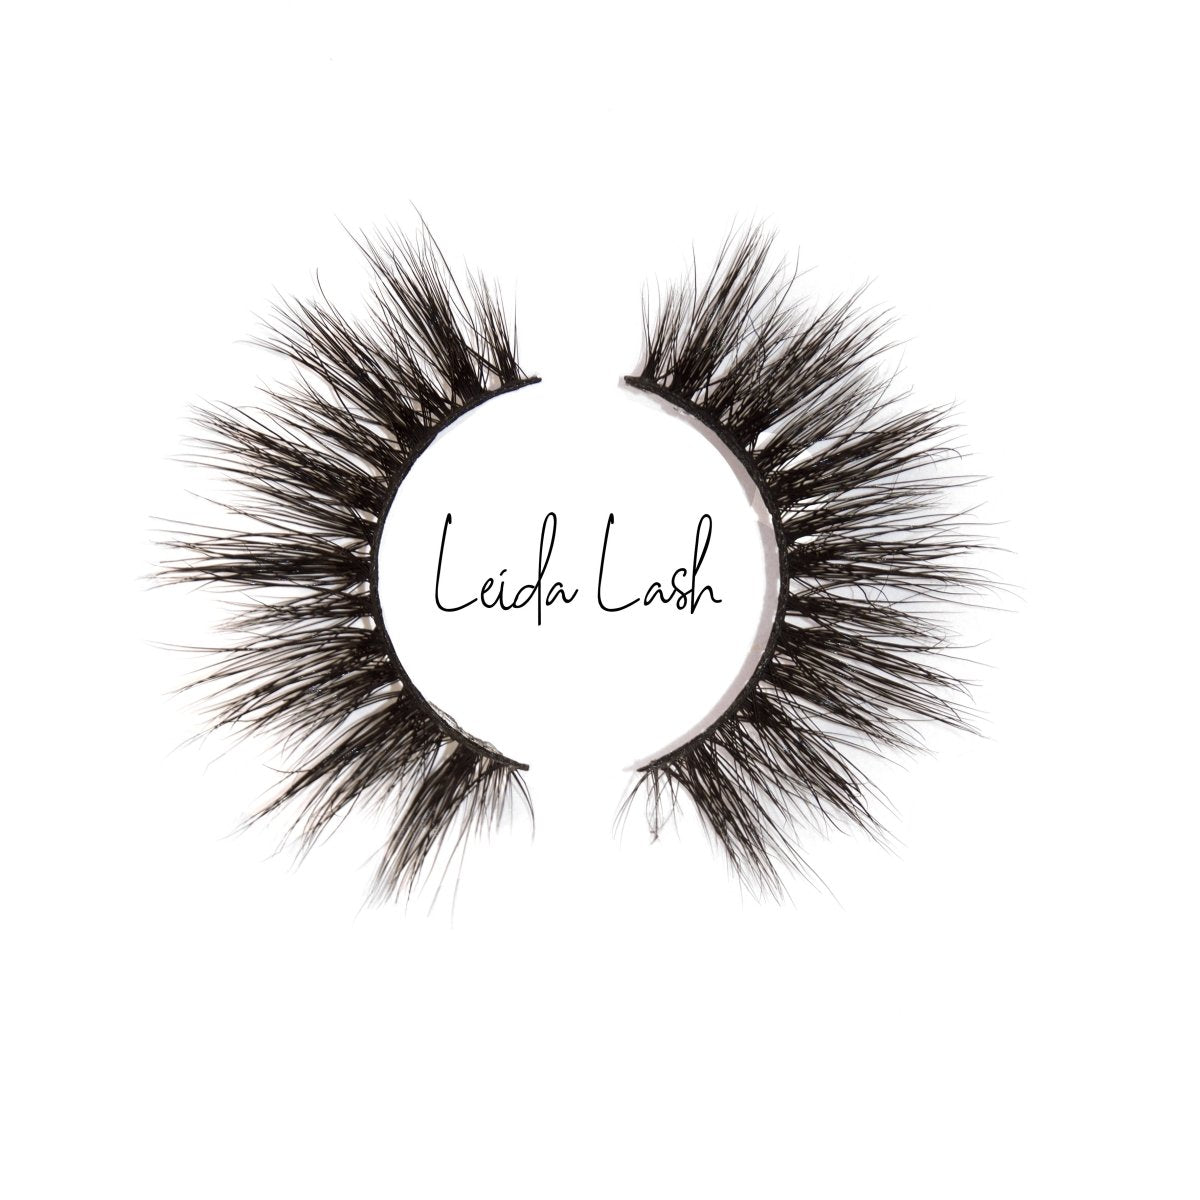 22mm lashes in the style call dayz with full fluffy 3d mink 